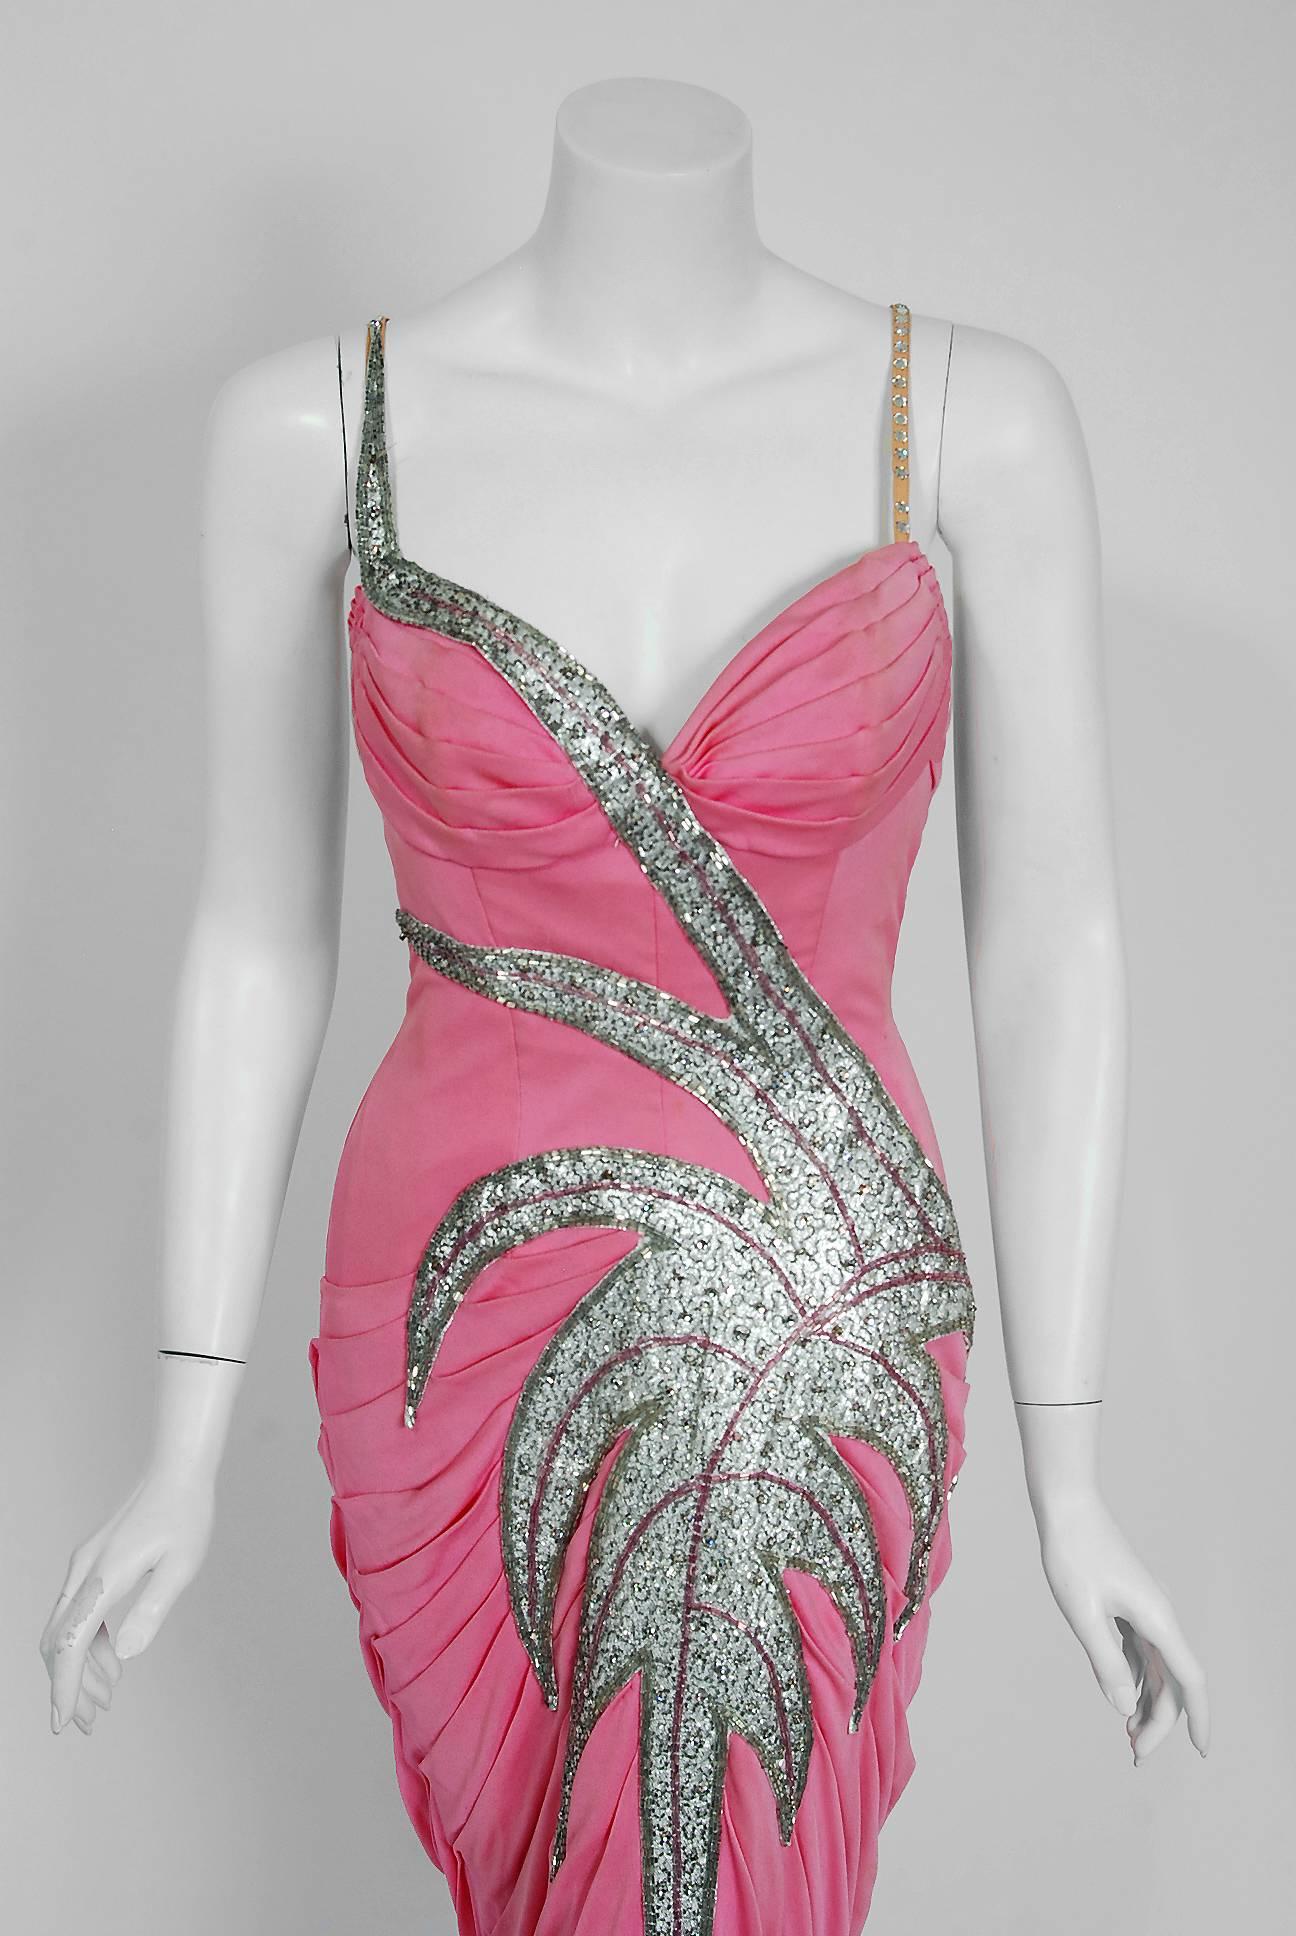 Women's Vintage 1950's Yma Sumac Metallic Beaded Pink Ruched Silk Hourglass Couture Gown